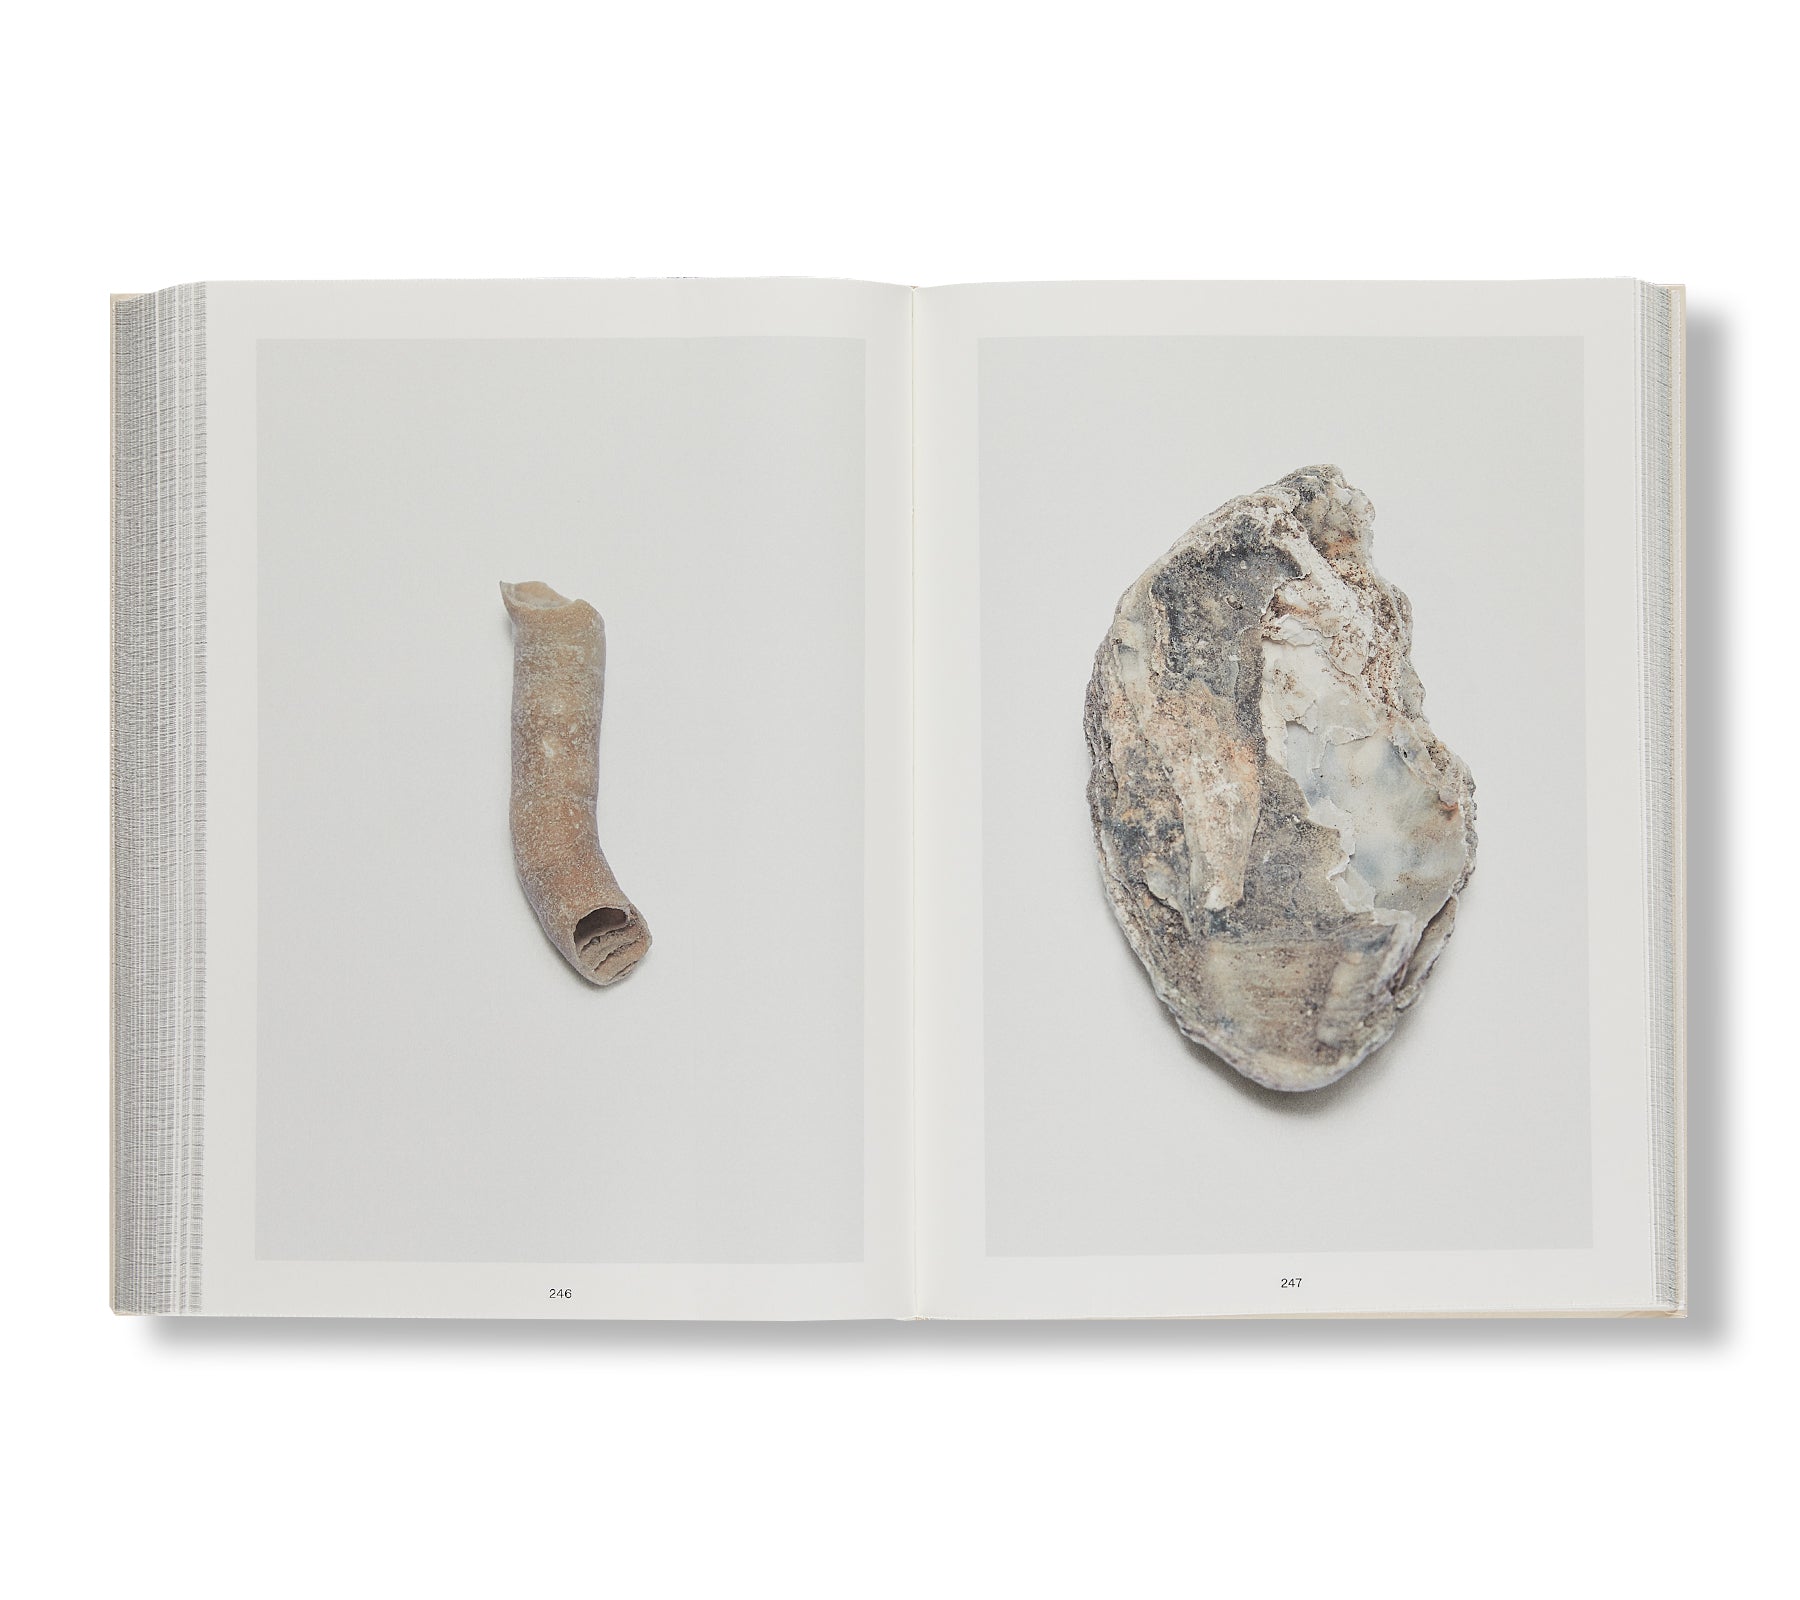 SHELL READER by Nina Canell